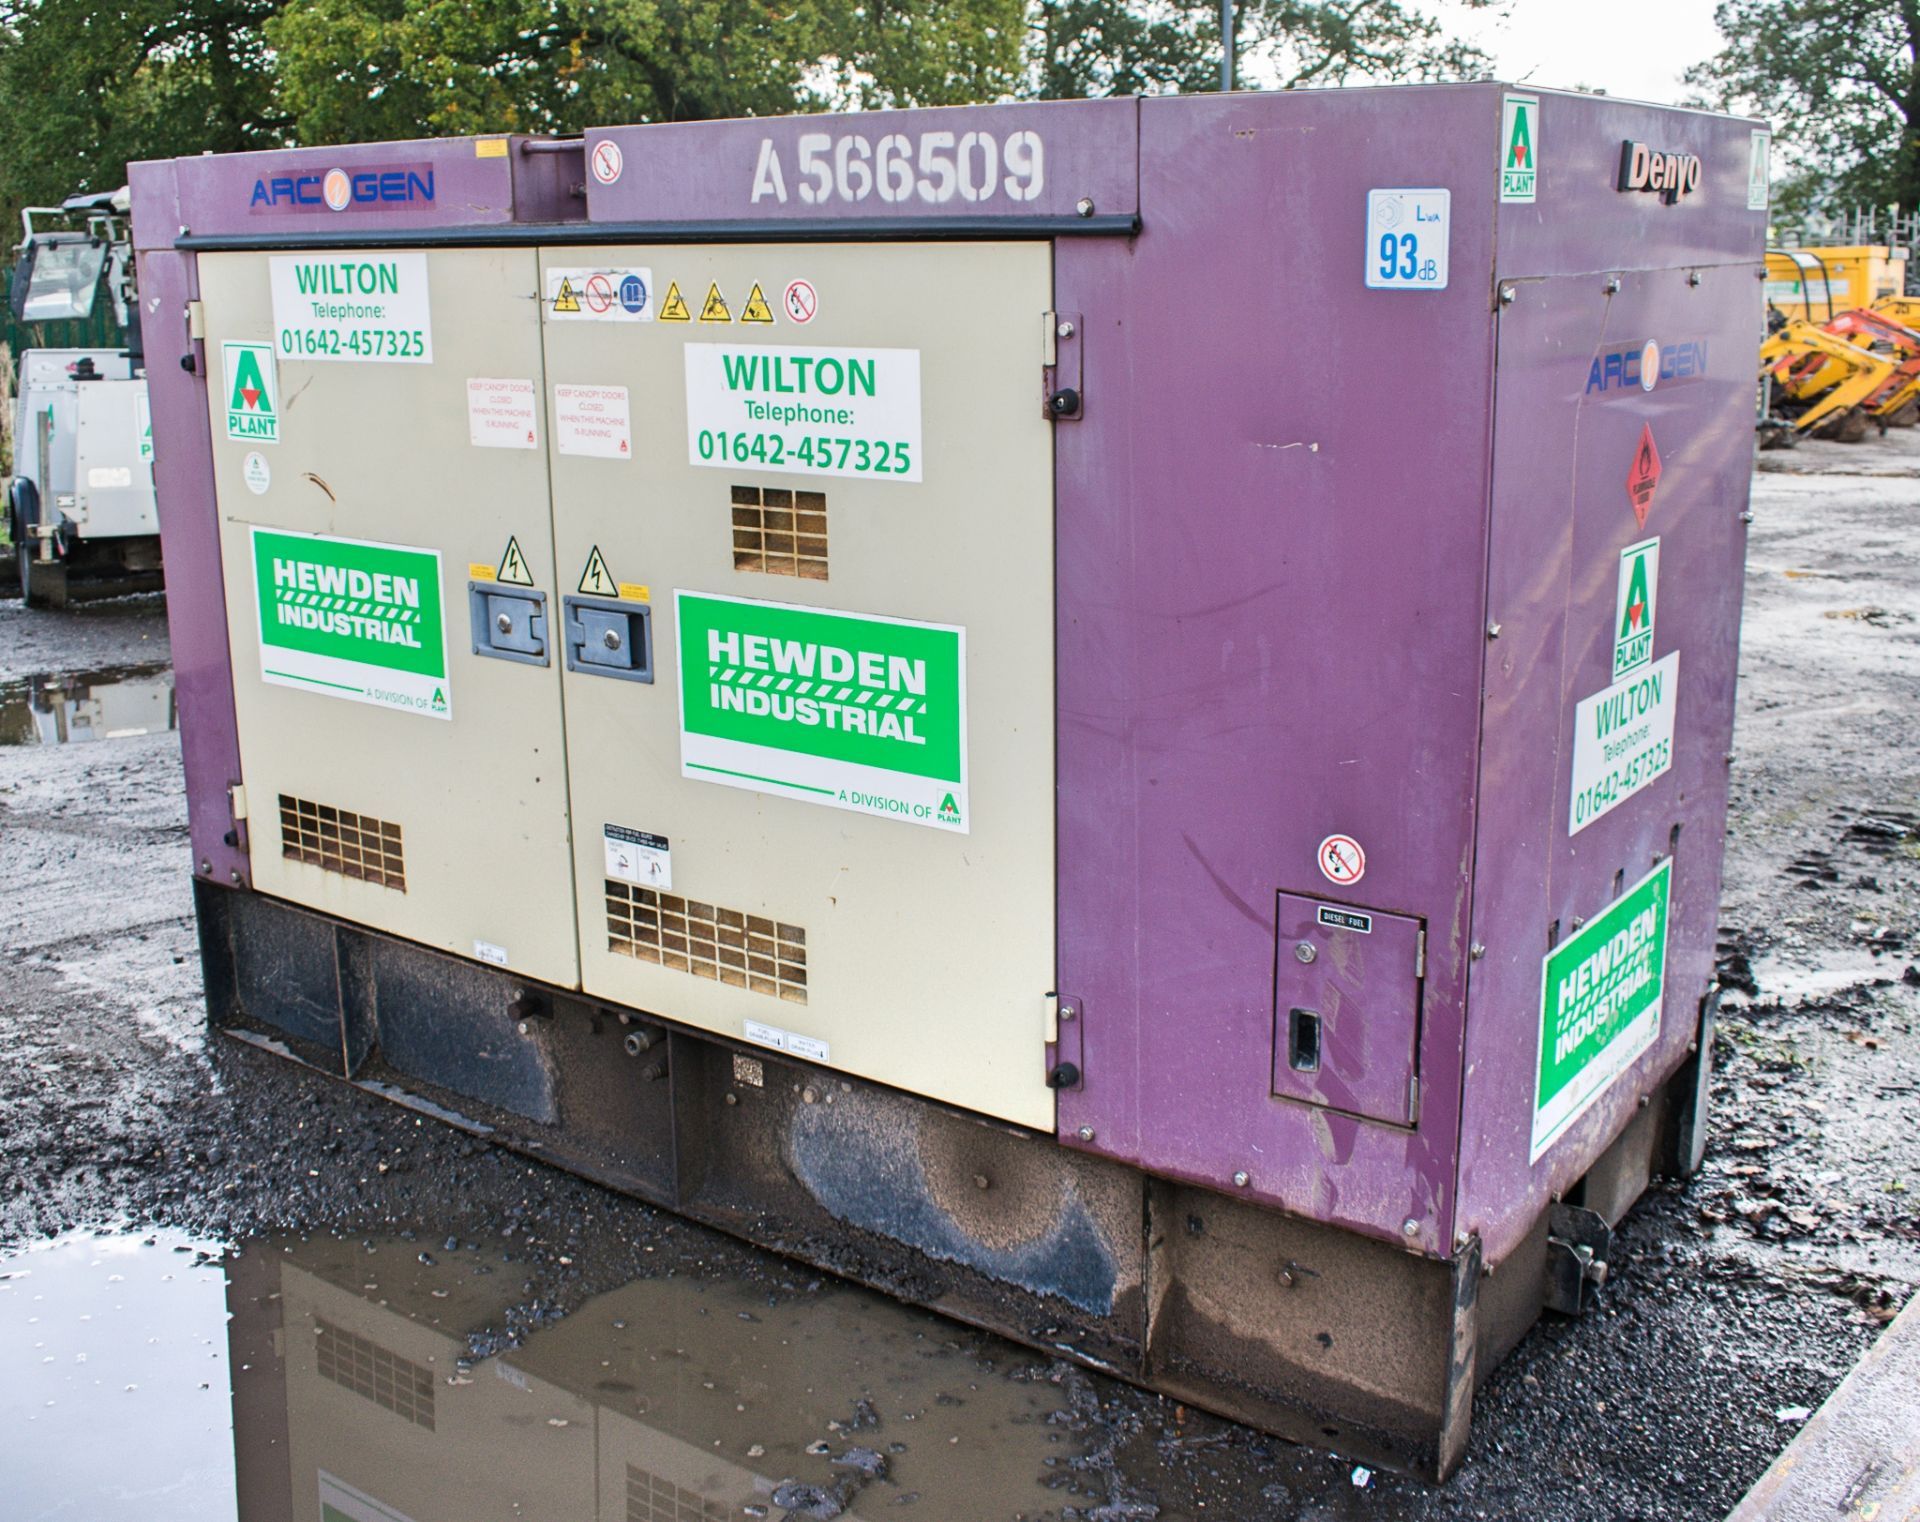 Denyo DCA-70 50 kva diesel driven generator Year: 2011 S/N: 3849695 Recorded Hours: 13,816 A566509